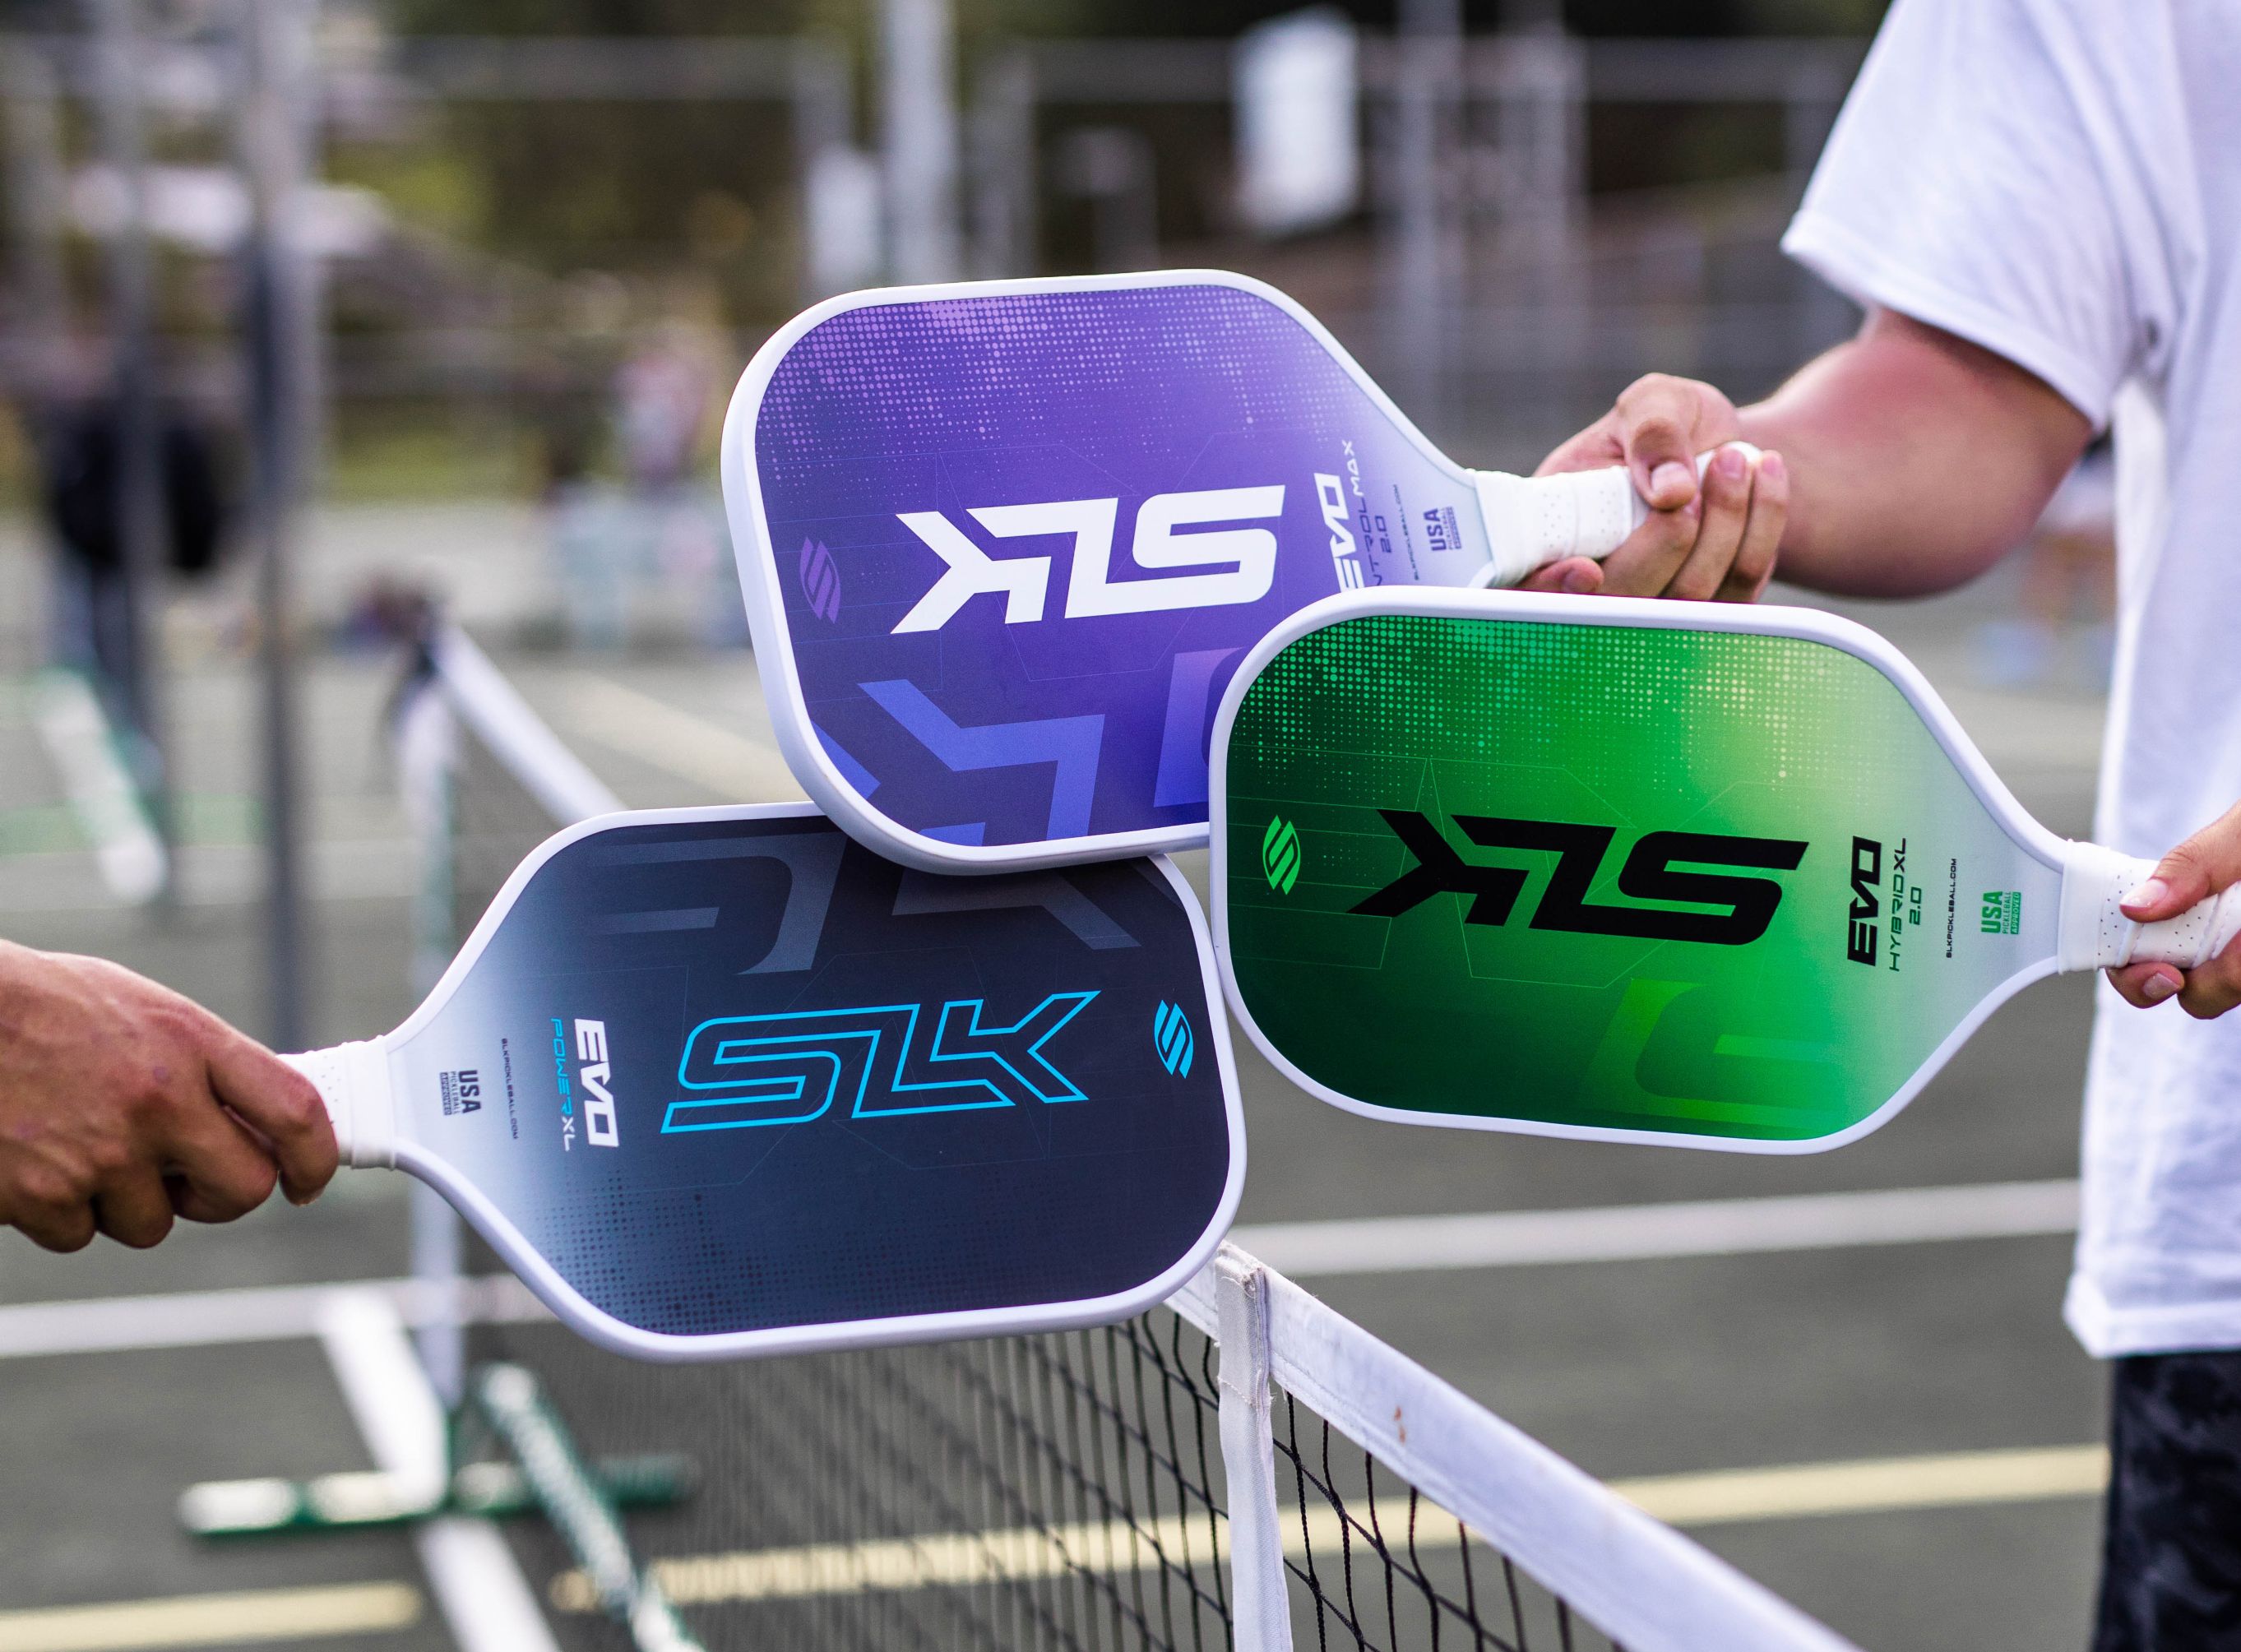 Here are some tips on the best ways to care for your pickleball paddle.